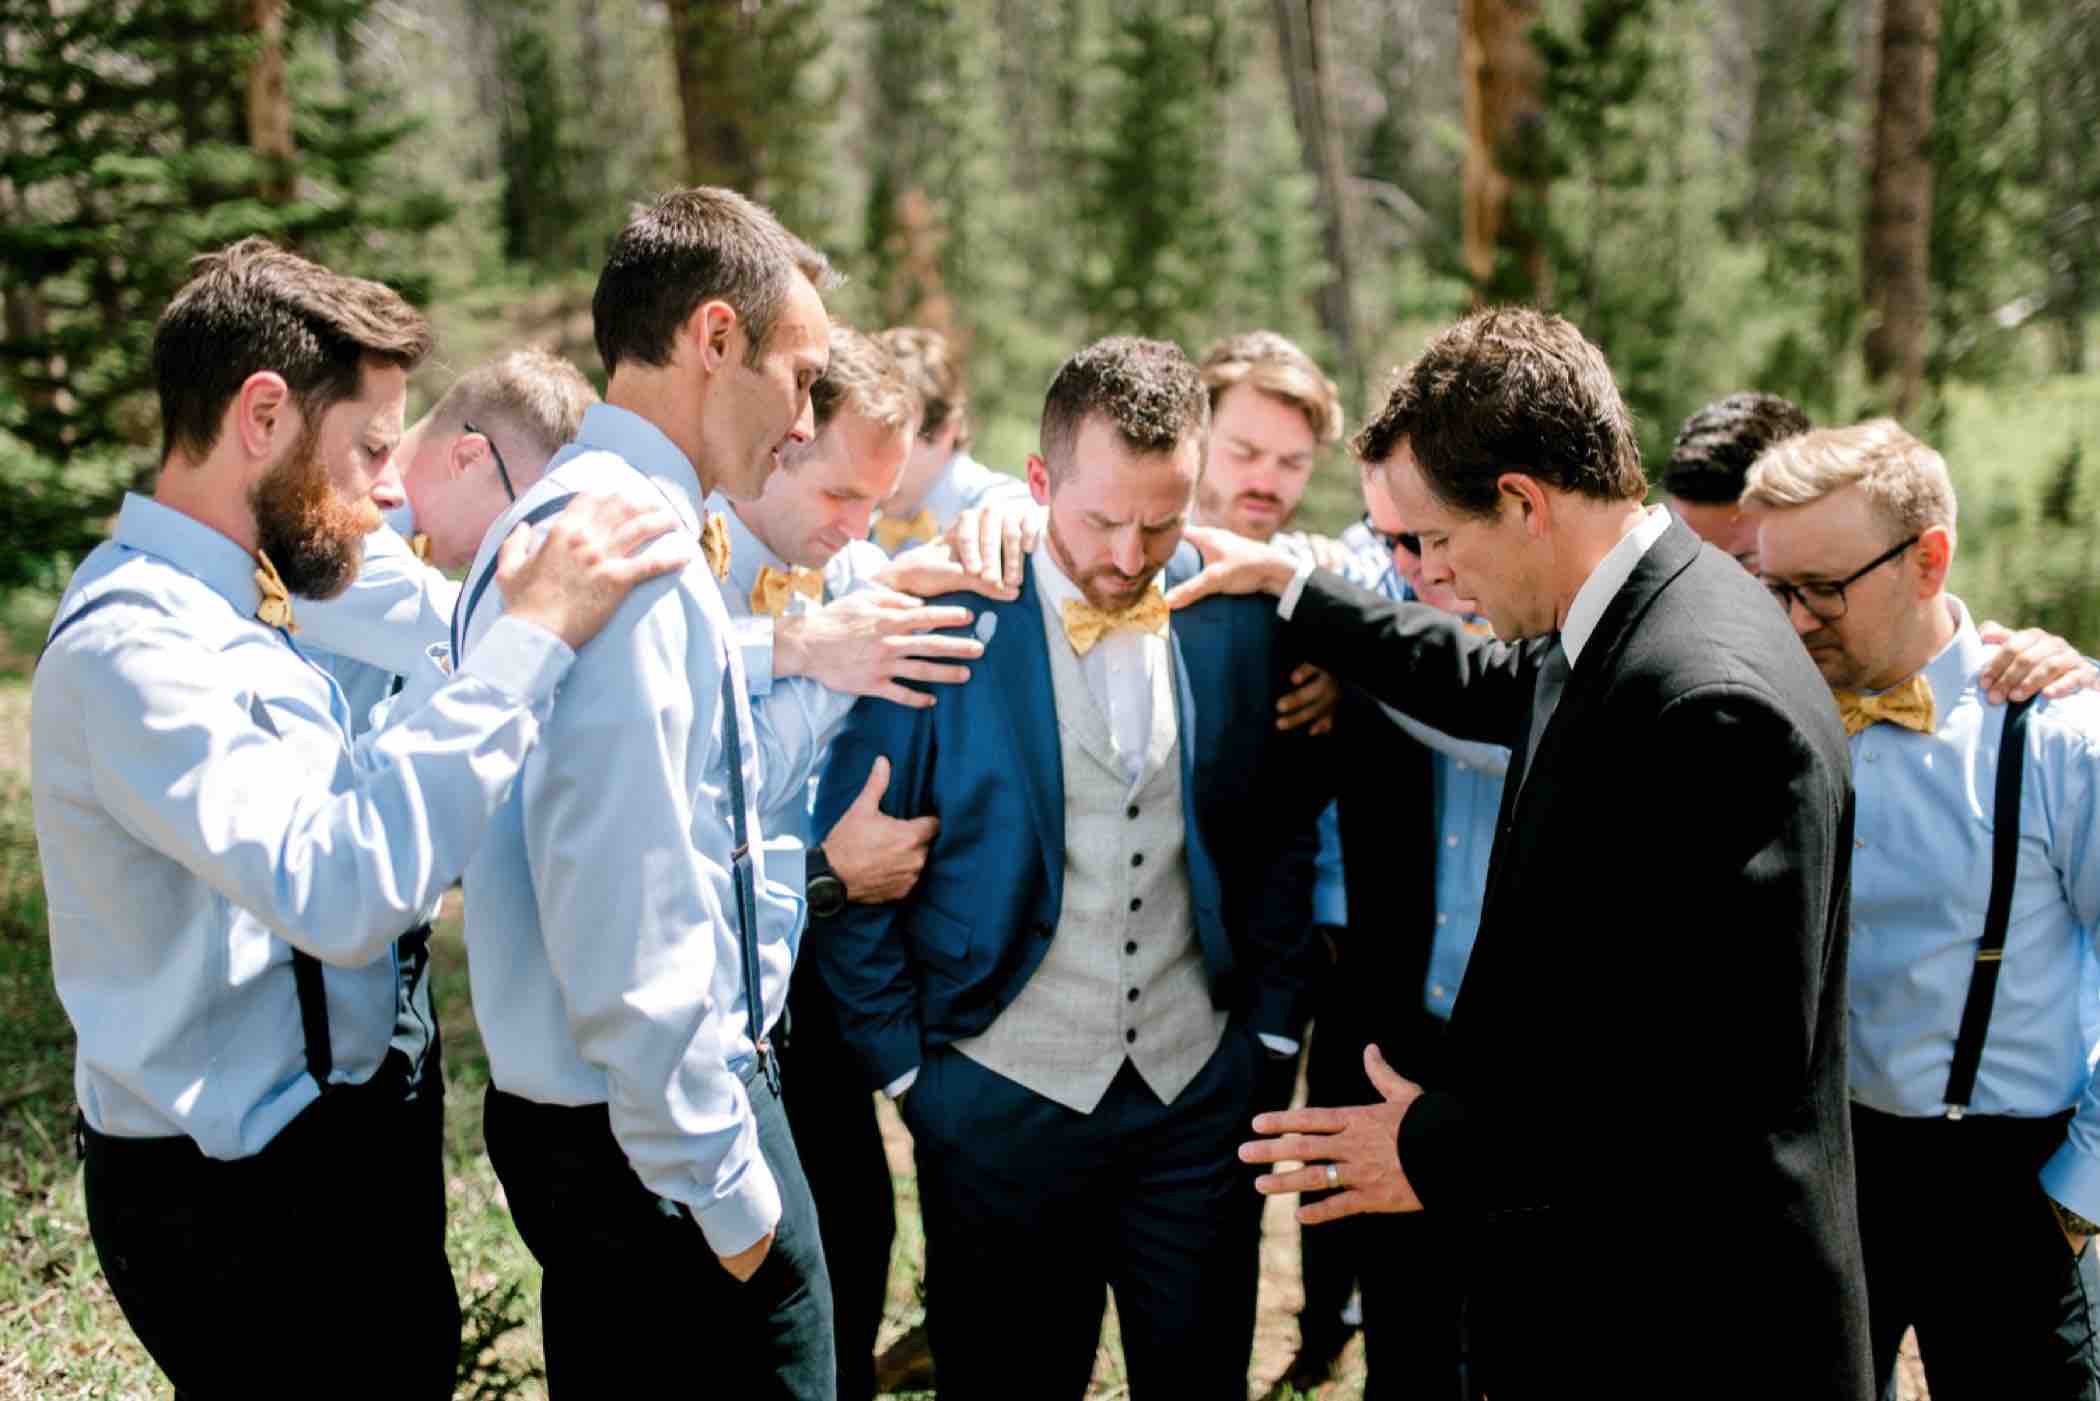 Groomsmen pray over the groom outside Piney River Ranch in Vail in the Colorado Rocky Mountains. Photo by Ali and Garrett, Romantic, Adventurous, Nostalgic Wedding Photographers.